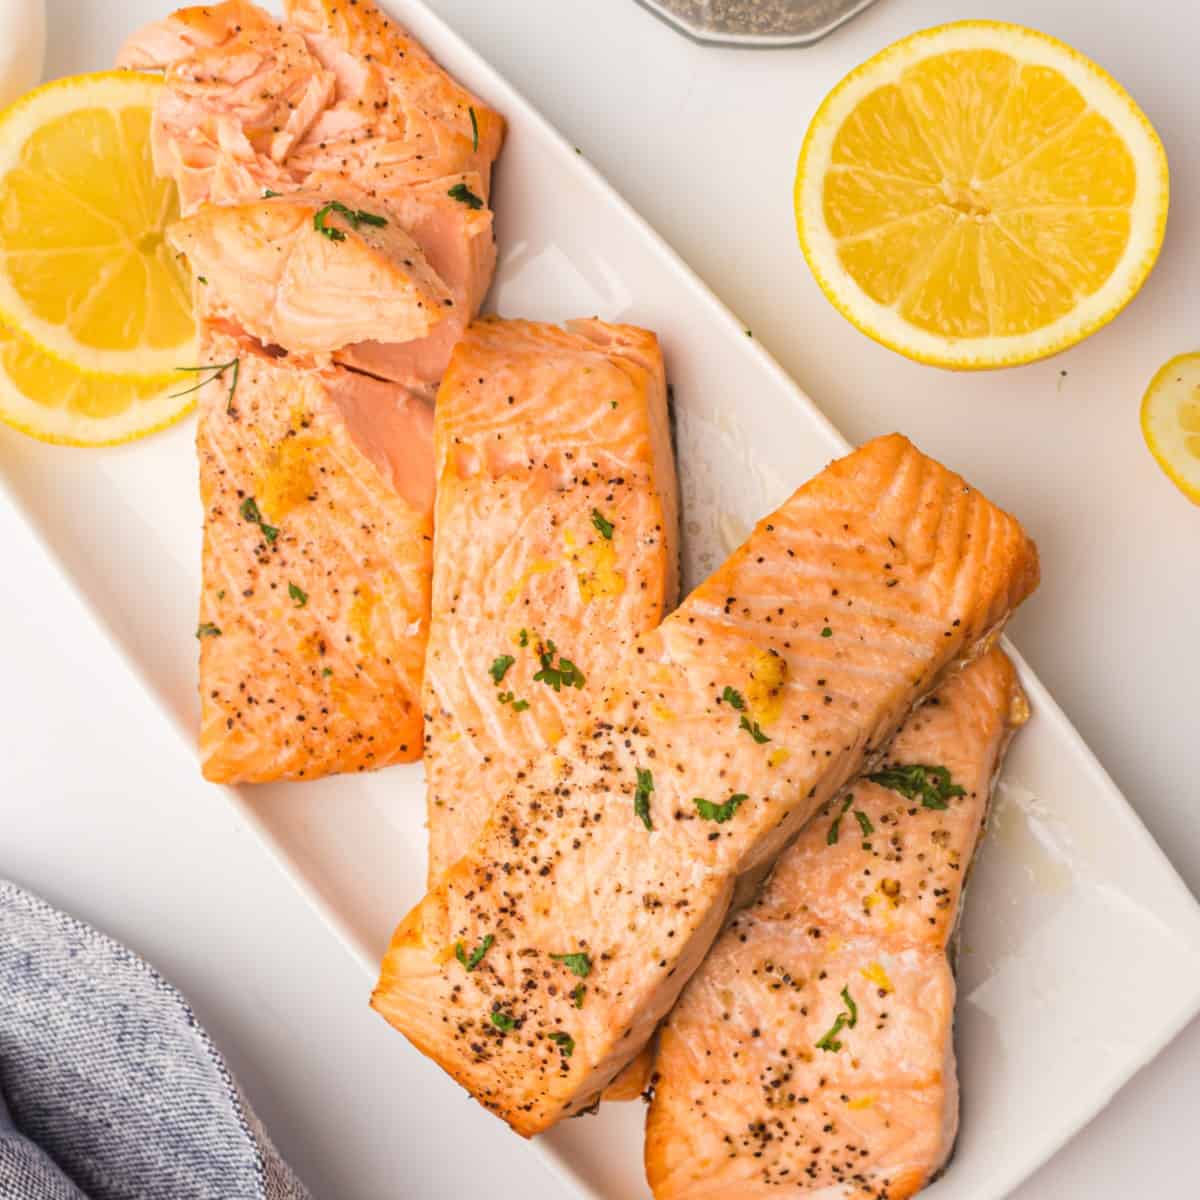 A flaky, cooked salmon fillet, air-fried from frozen, on a white plate with lemon slices.